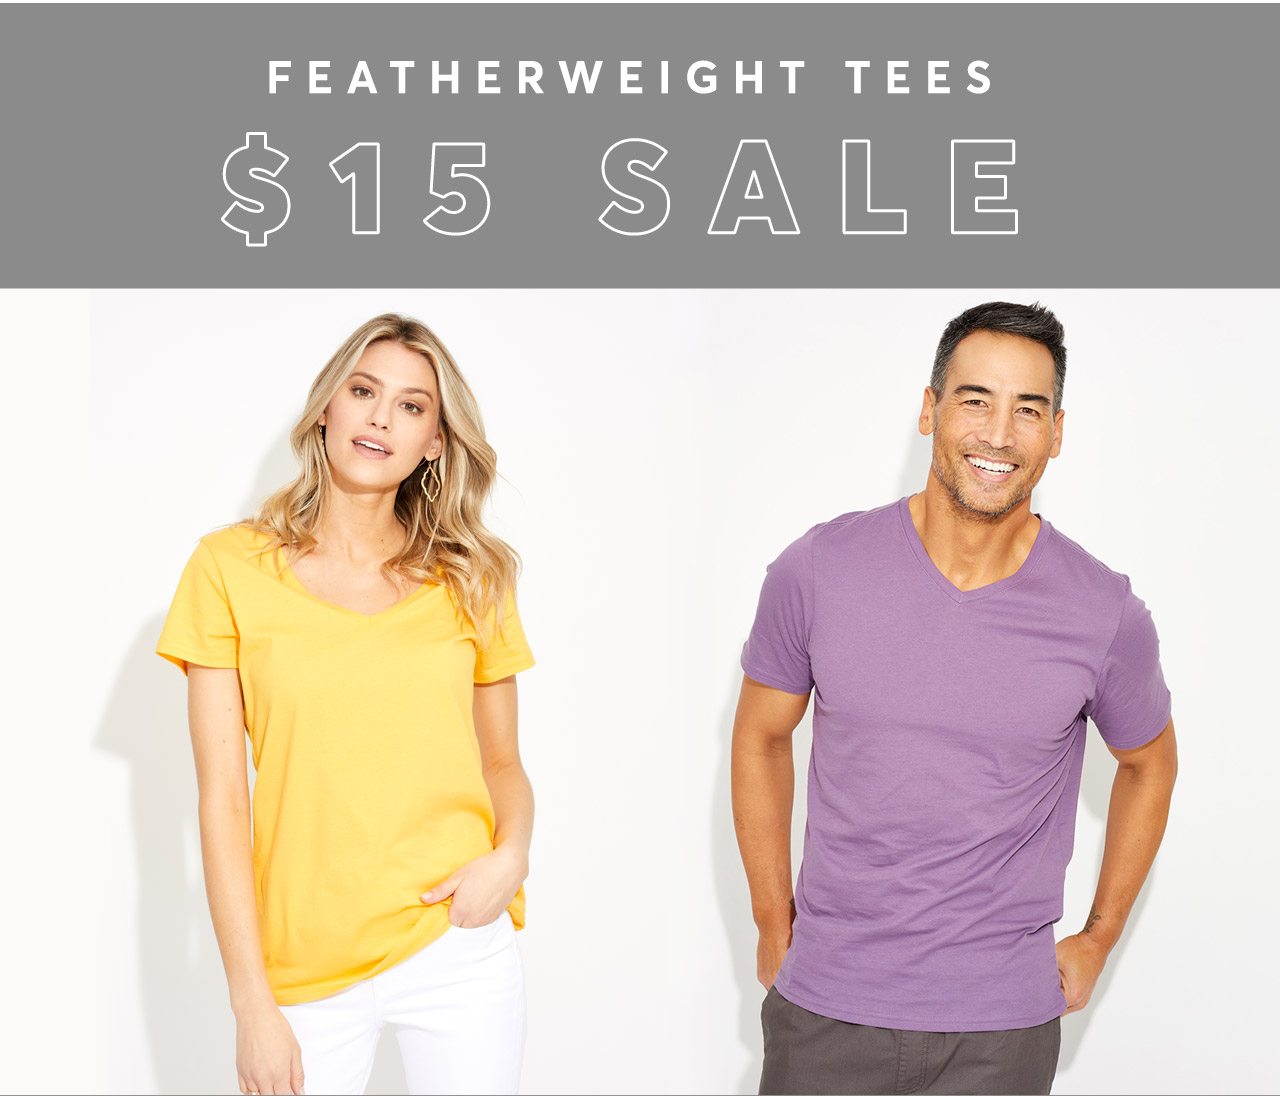 Featherweight Tees $15 Sale